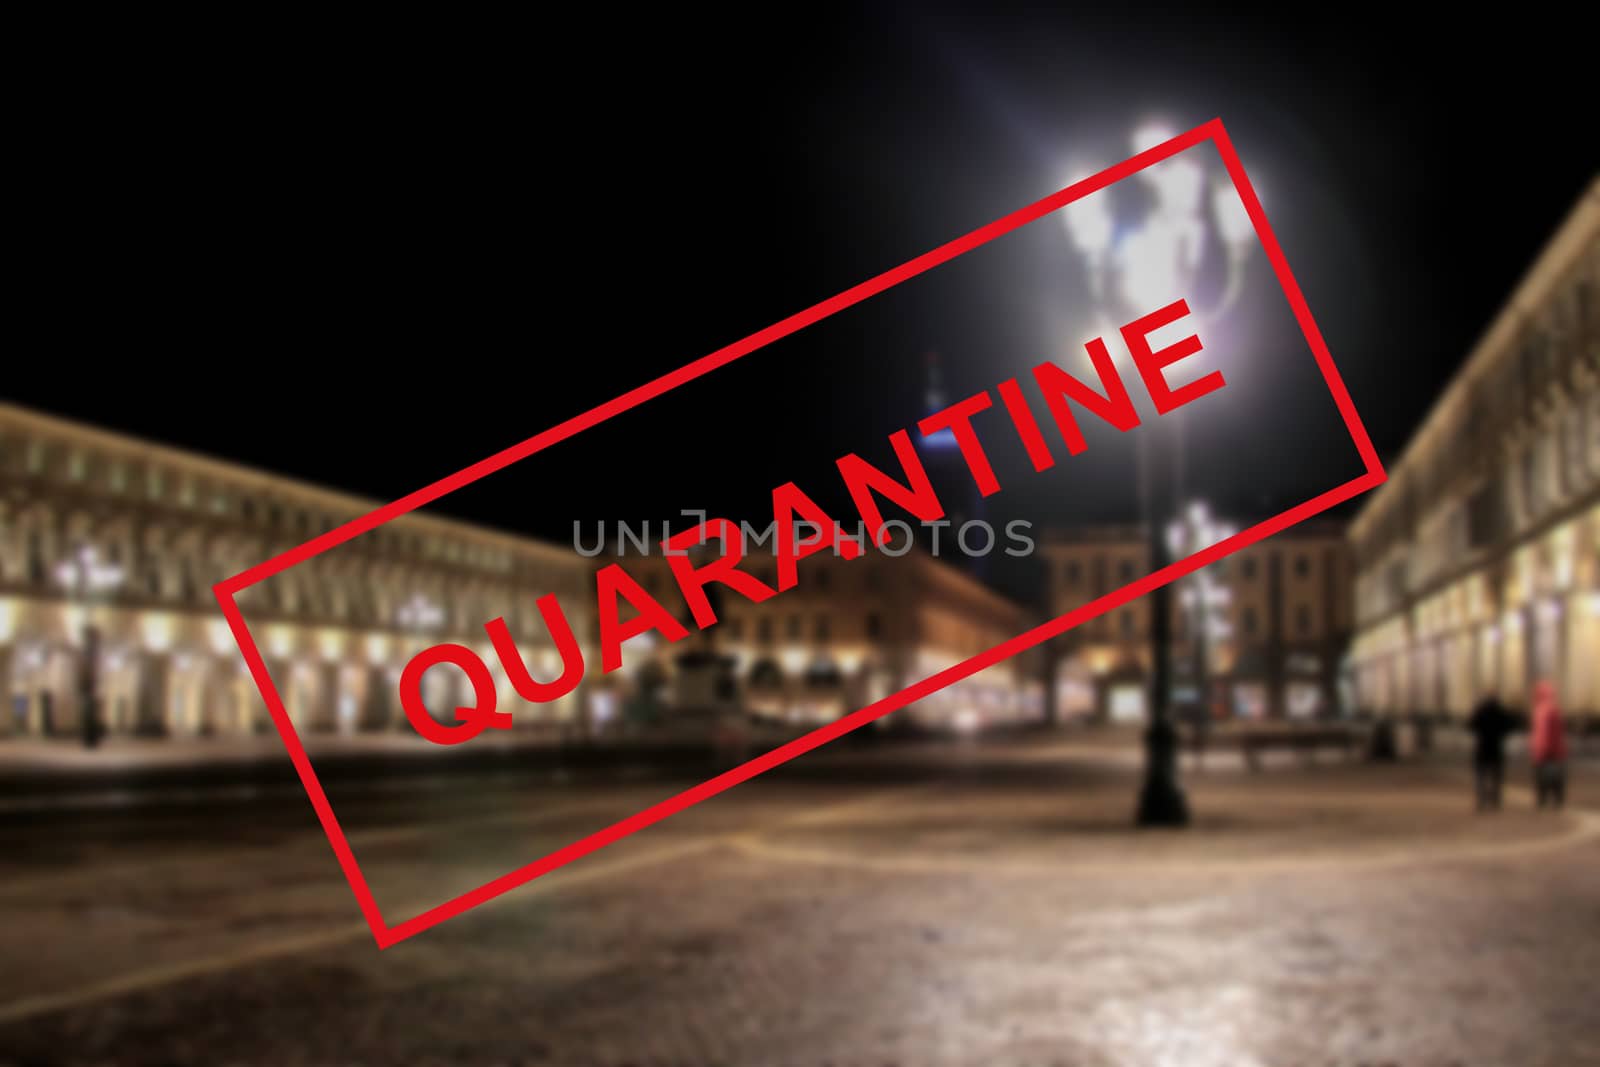 Coronavirus quarantine in Europe. Text against the background of the historical architecture of Italy in Turin. Concept of the economy and financial markets affected by the coronavirus outbreak and fears of a pandemic.